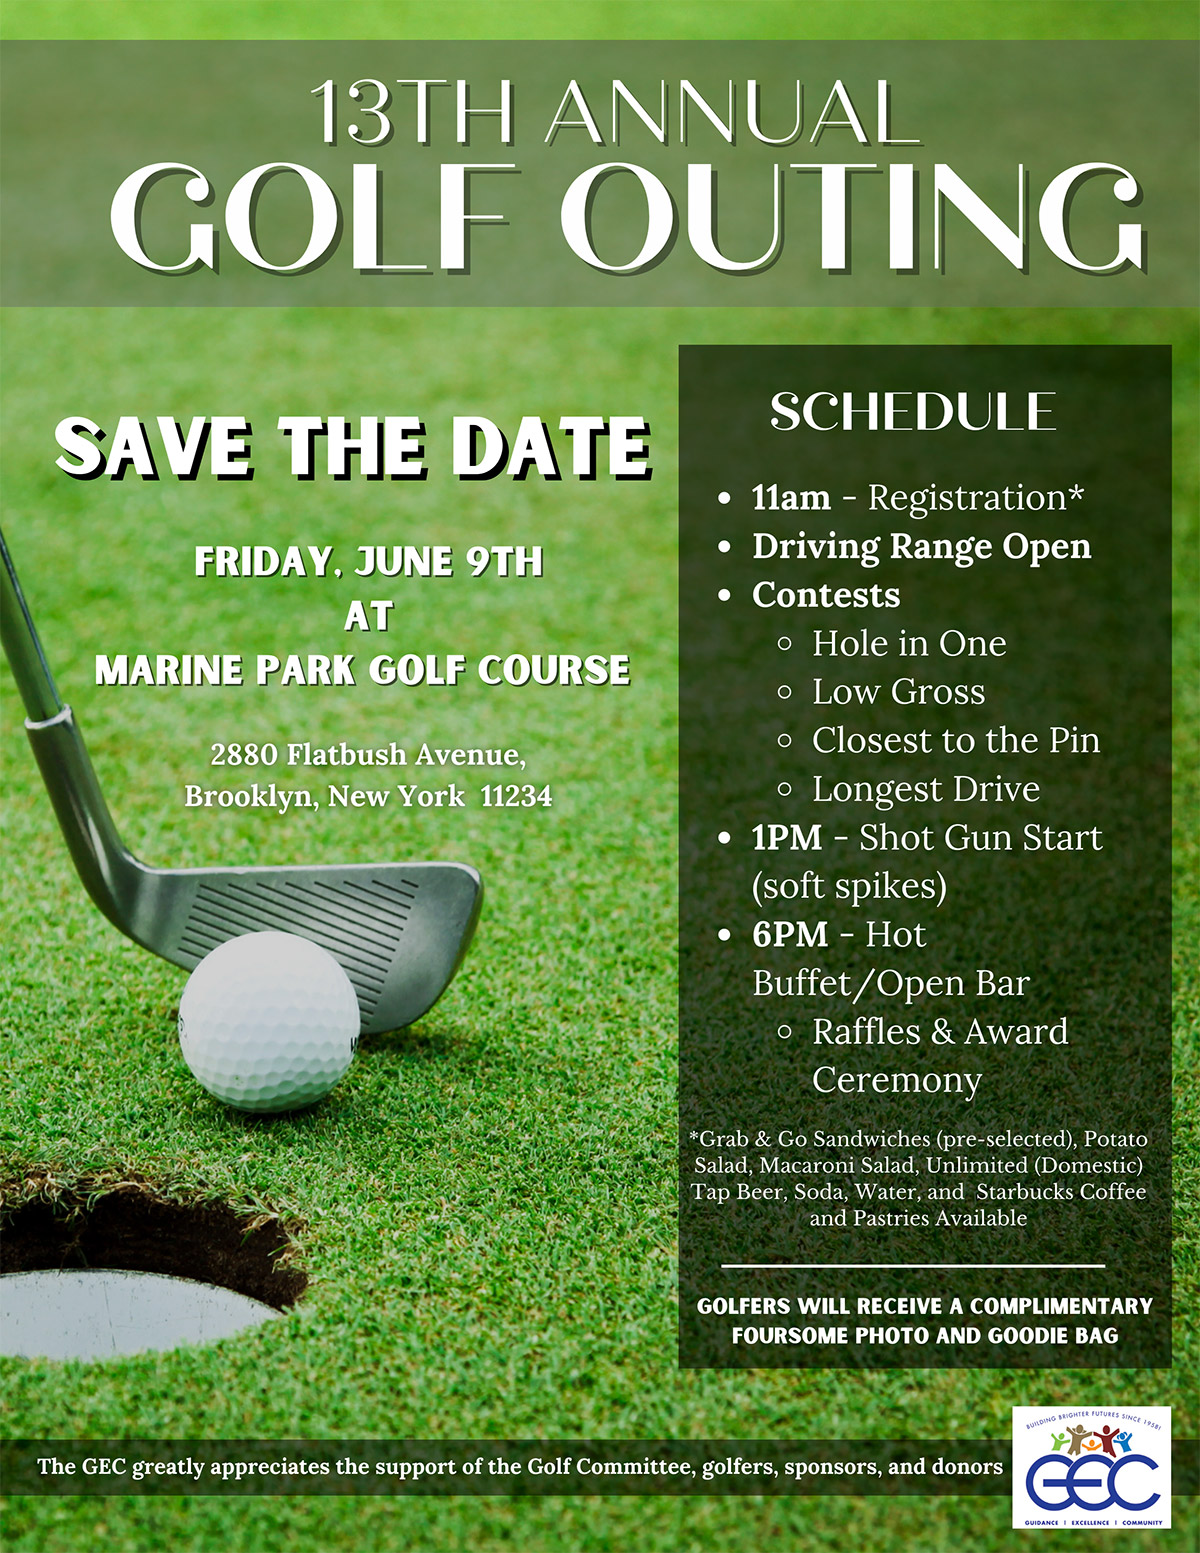 13th Annual Golf Outing - Save the Date